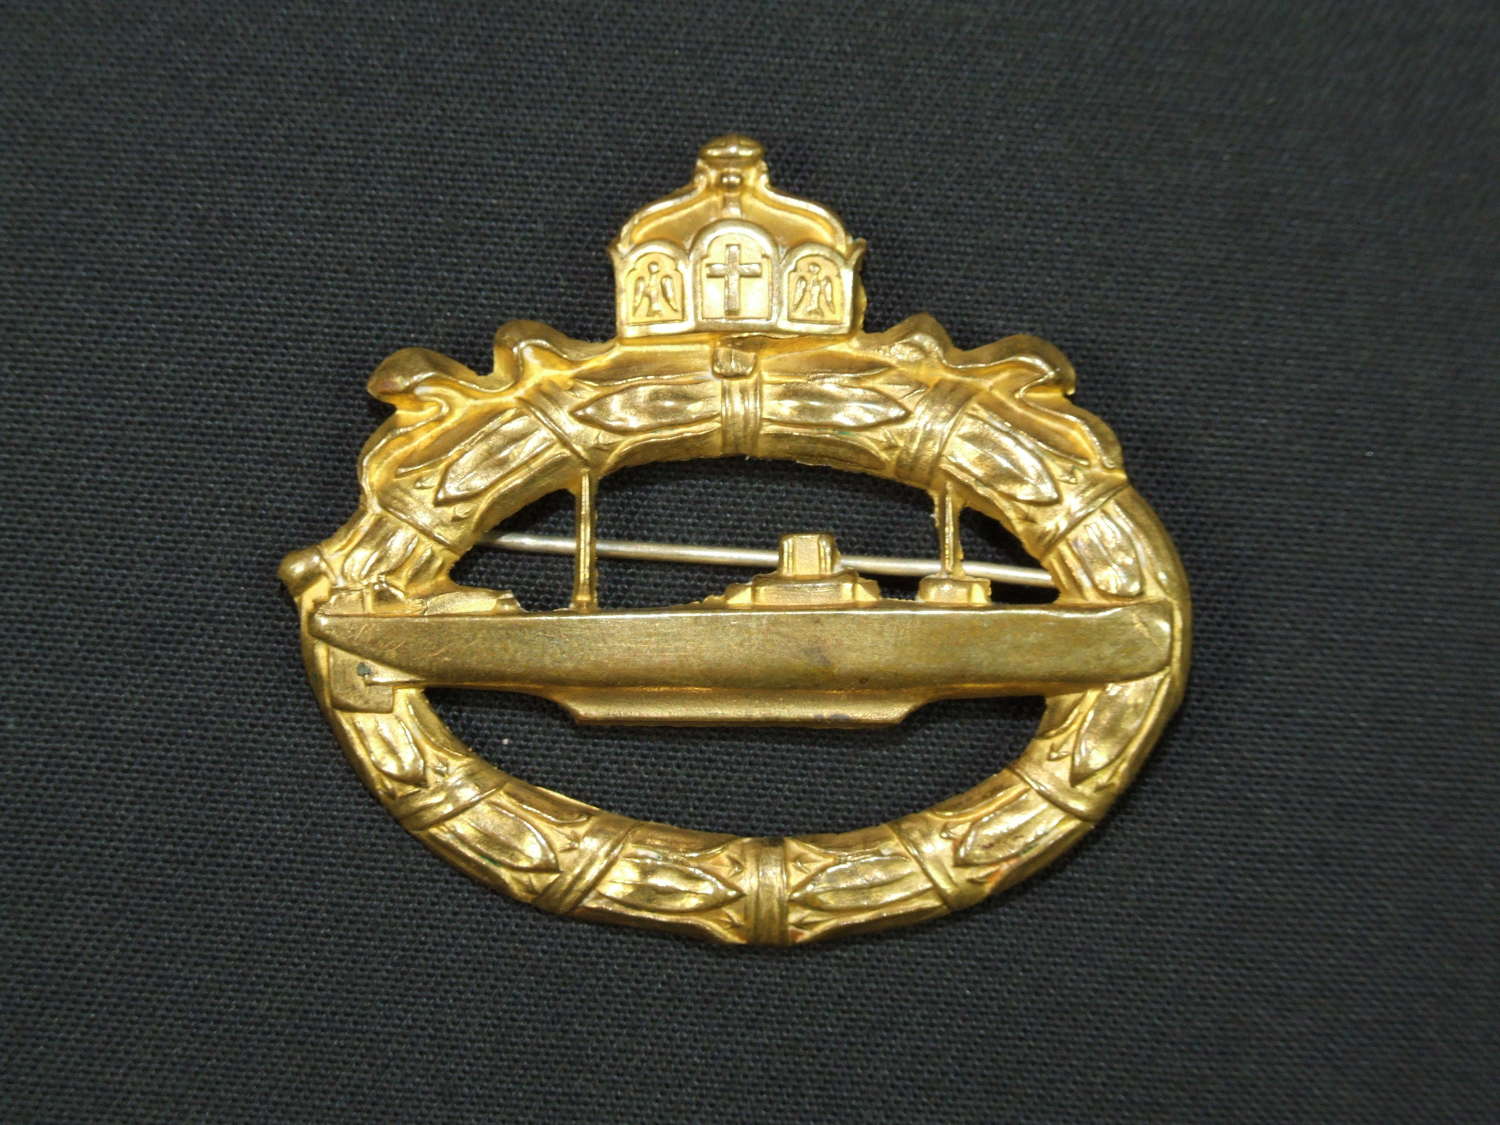 1920s - 30s Produced Kaiserliche Marine U Boat Badge by AWS